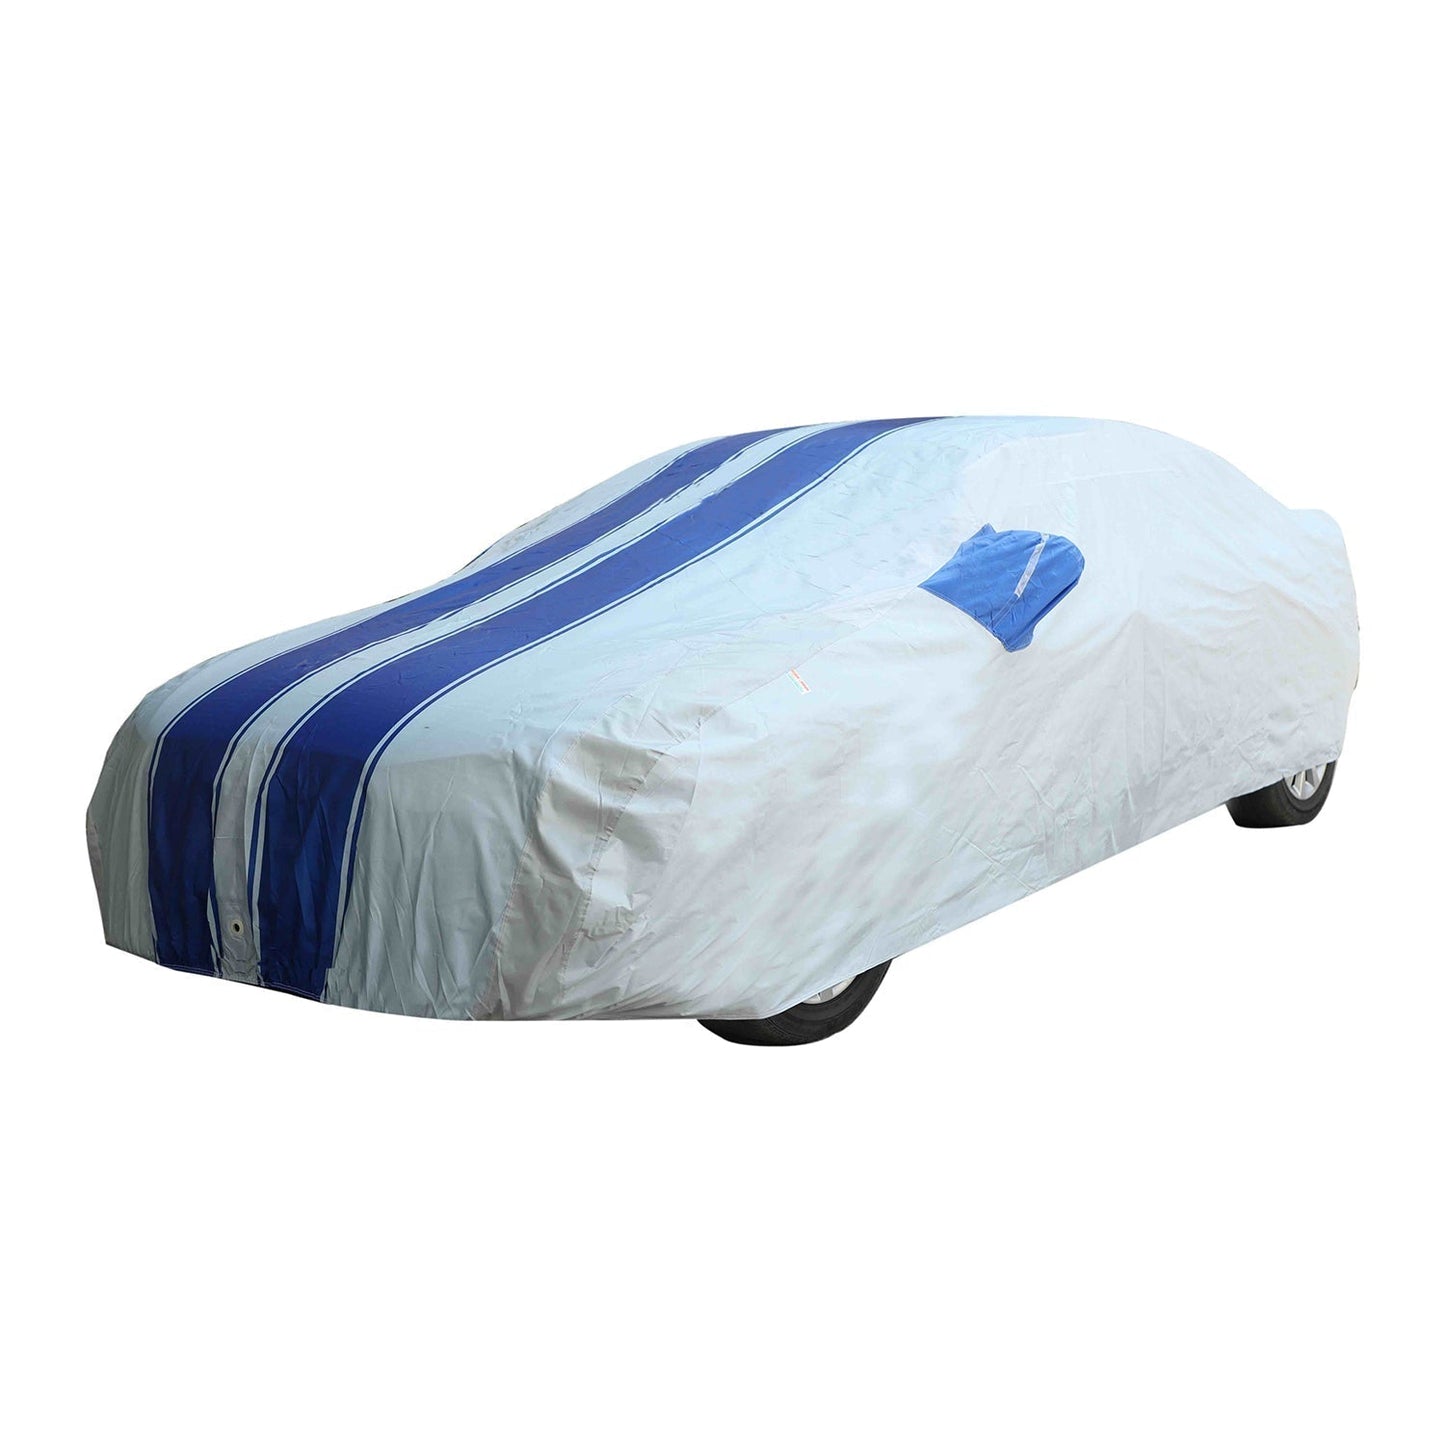 Oshotto 100% Blue dustproof and Water Resistant Car Body Cover with Mirror Pockets For Maruti Suzuki Alto 800